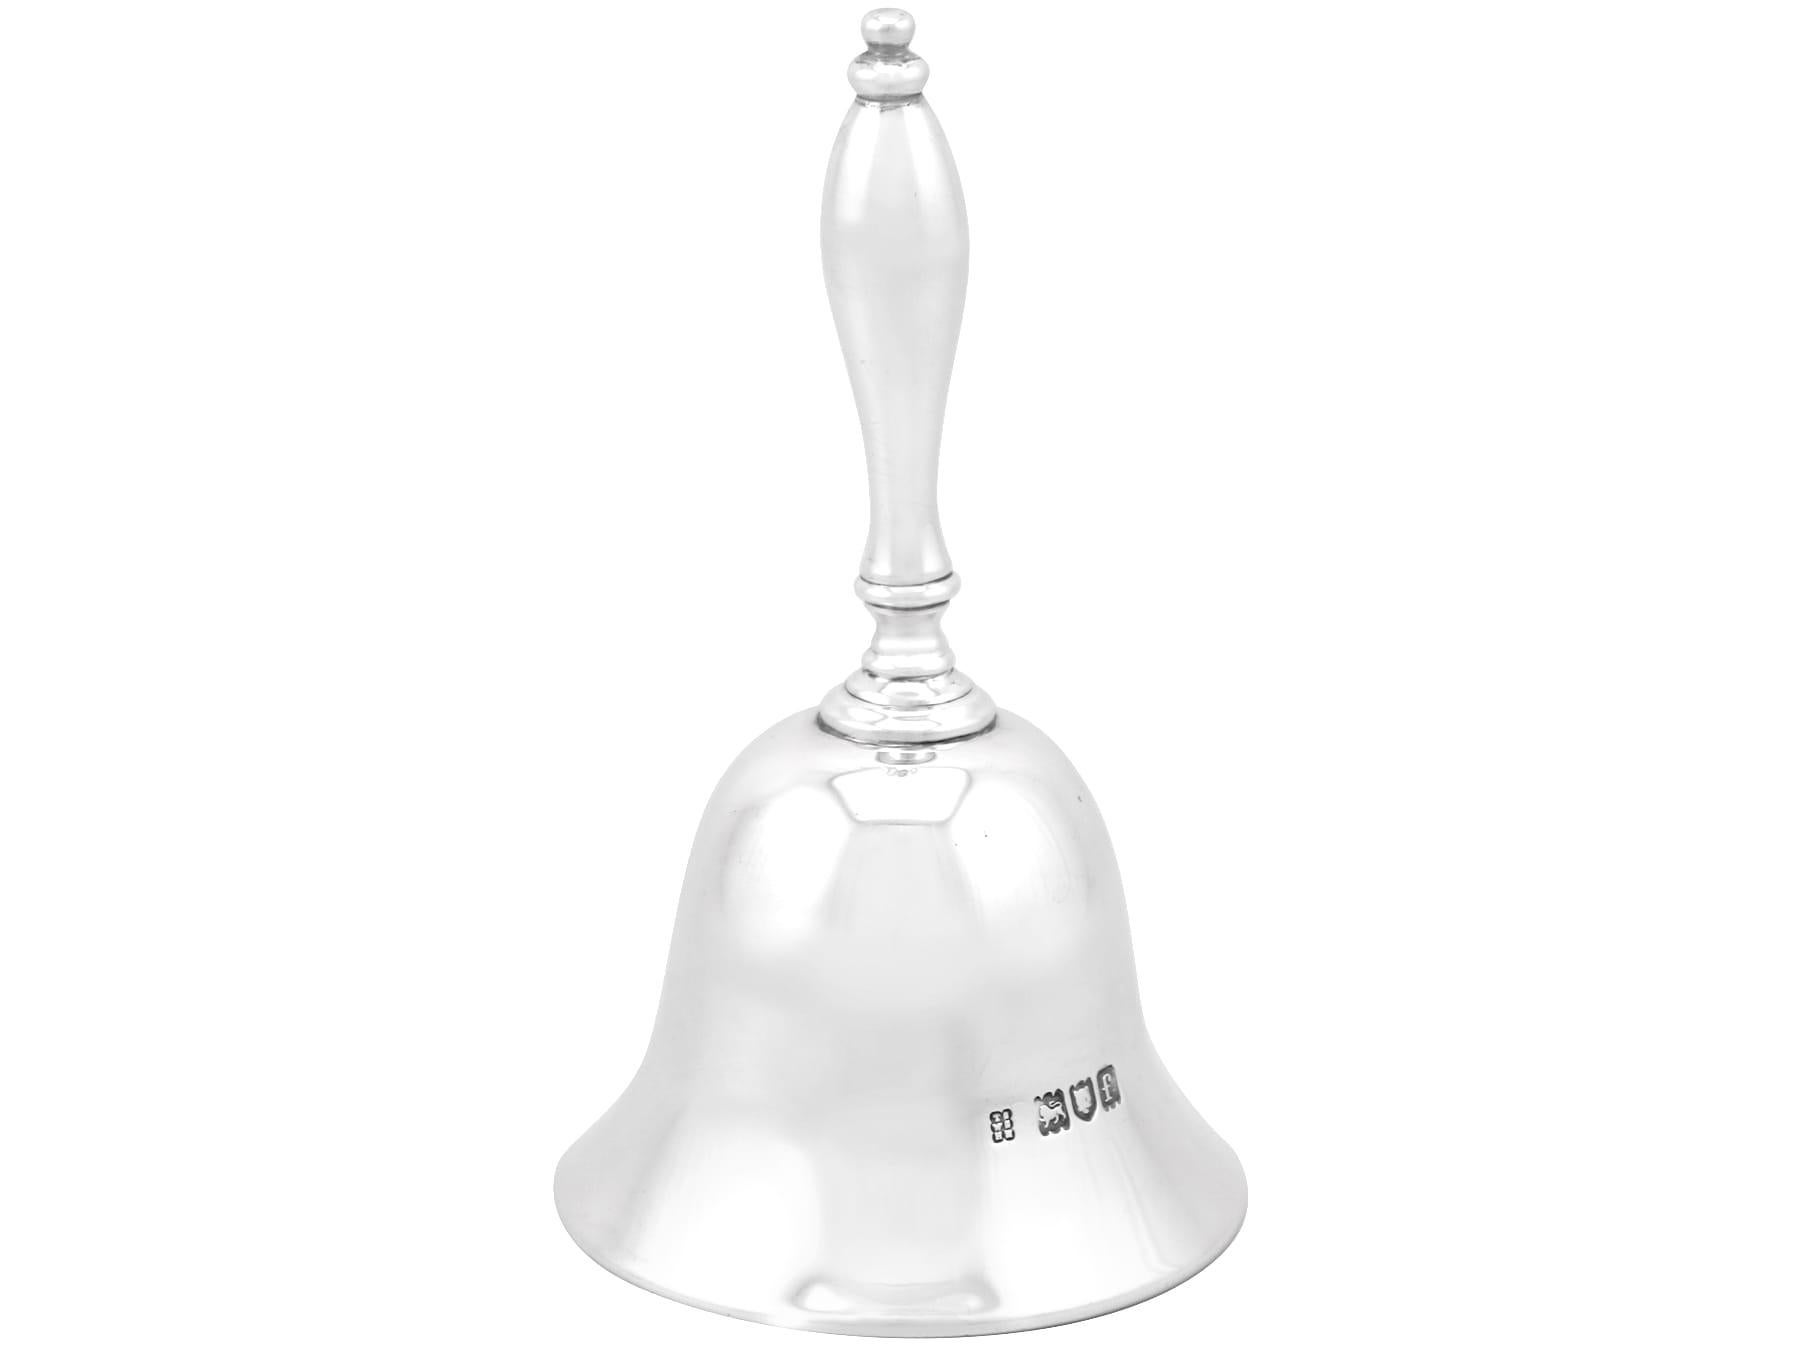 An exceptional, fine and impressive antique Edwardian English sterling silver table bell; an addition to our range of ornamental silverware

This exceptional antique Victorian cast sterling silver table bell has a plain bell-shaped form.

The